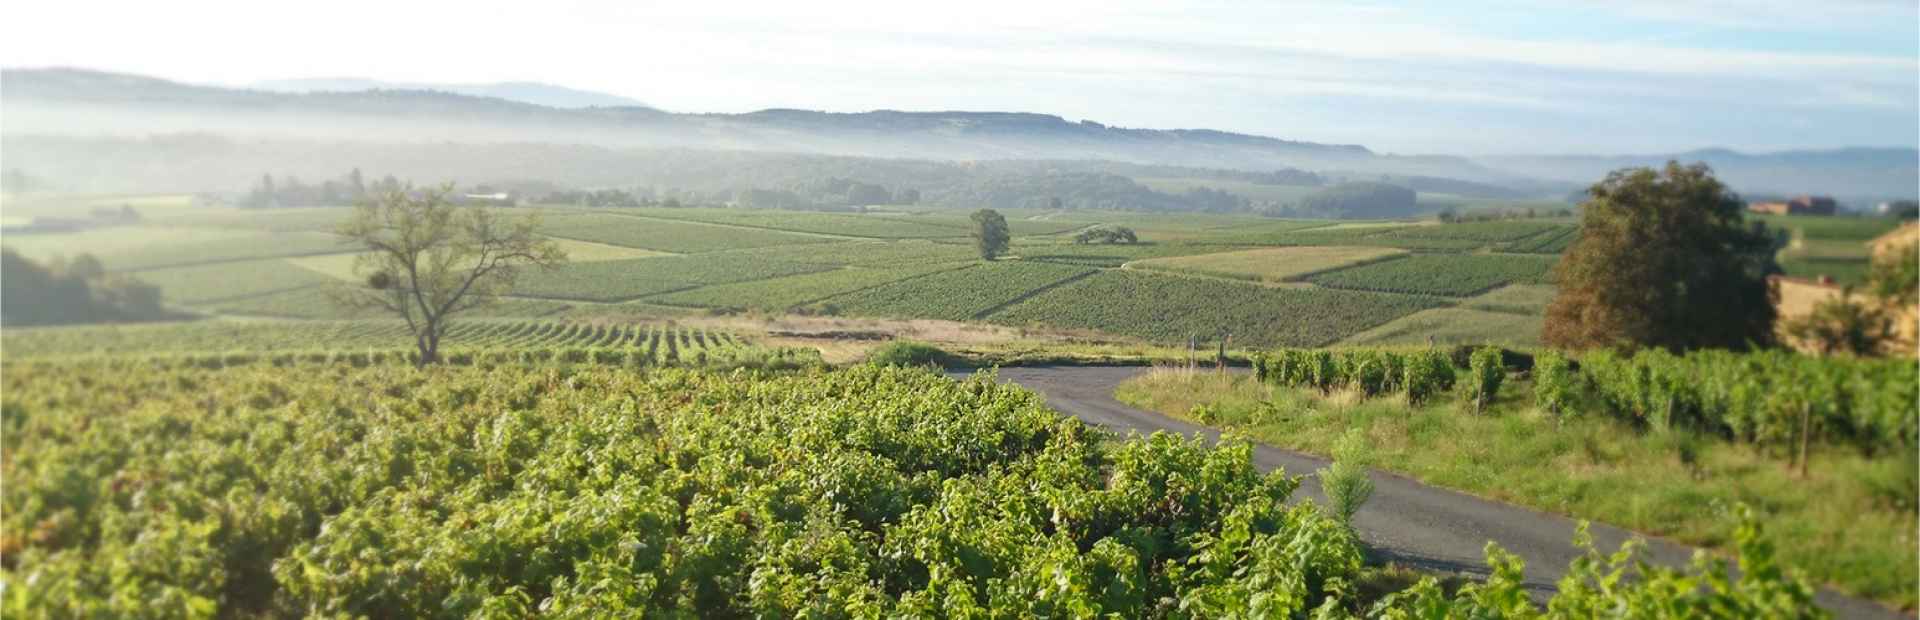 Winesof the appellation Brouilly